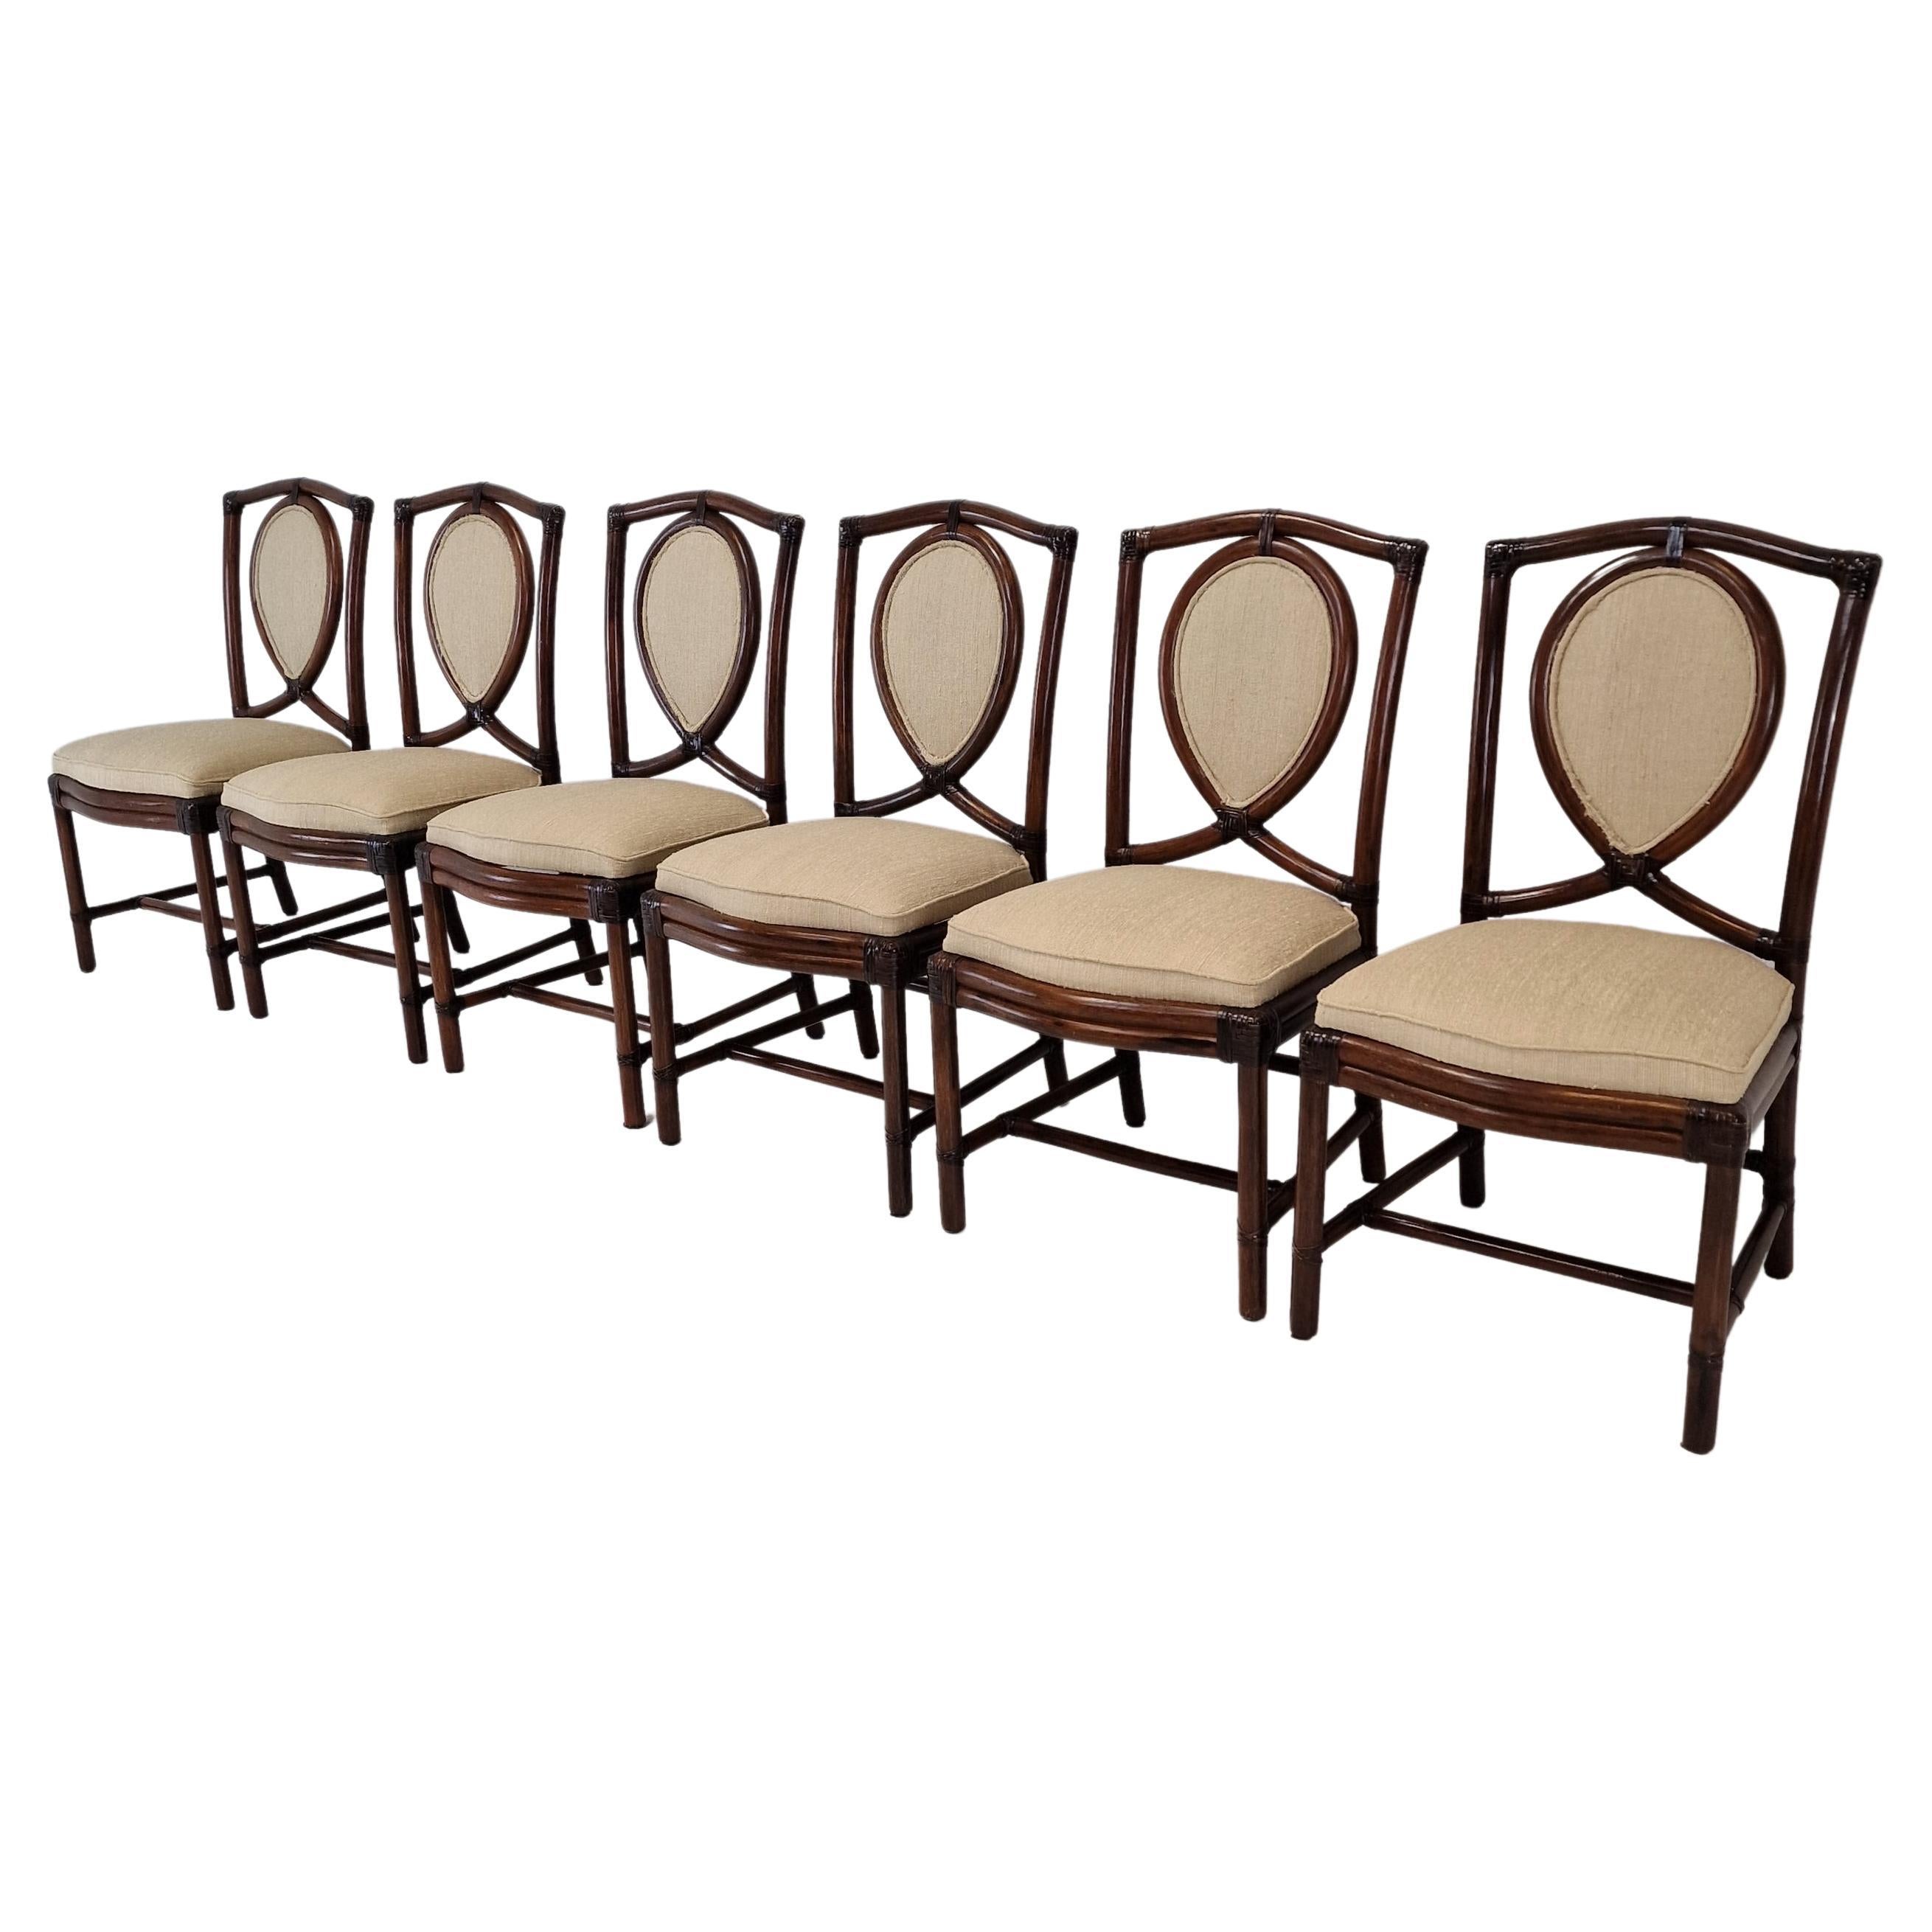 Set of 6 Bamboo Dining Chairs from Gasparucci Italo, 1970s For Sale